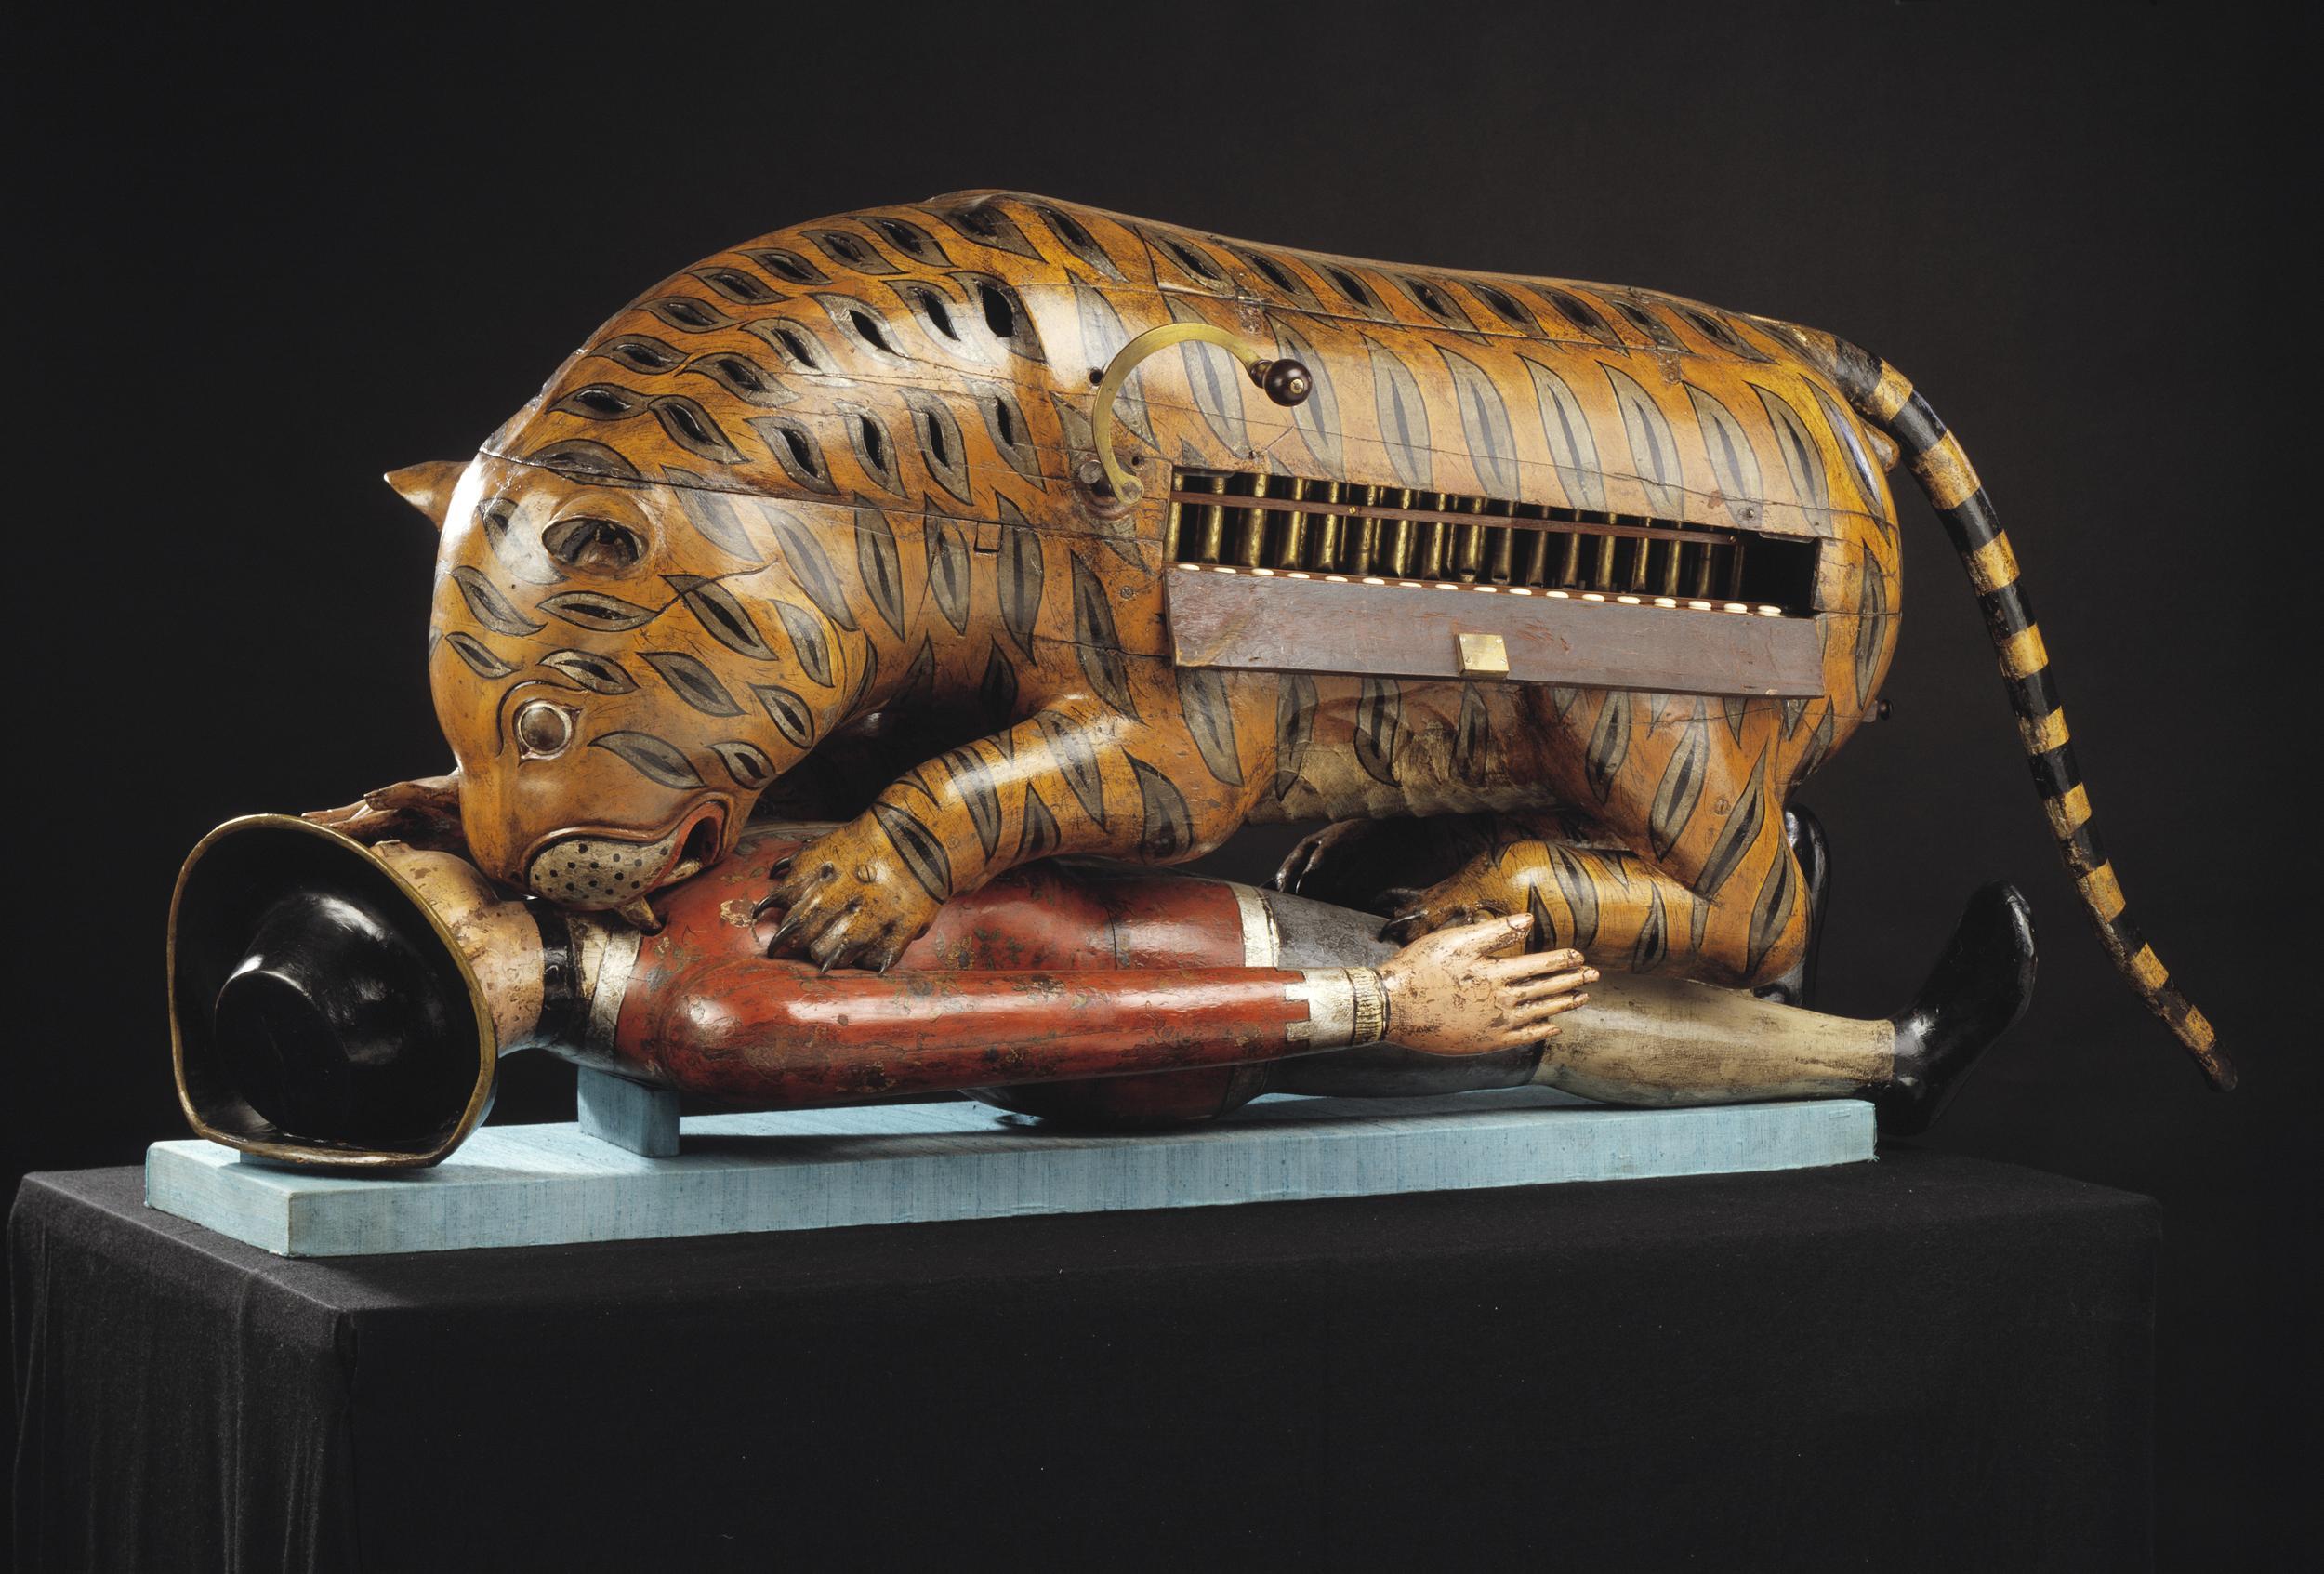 Tipoo's tiger by Unknown Artist - 1793 Victoria and Albert Museum